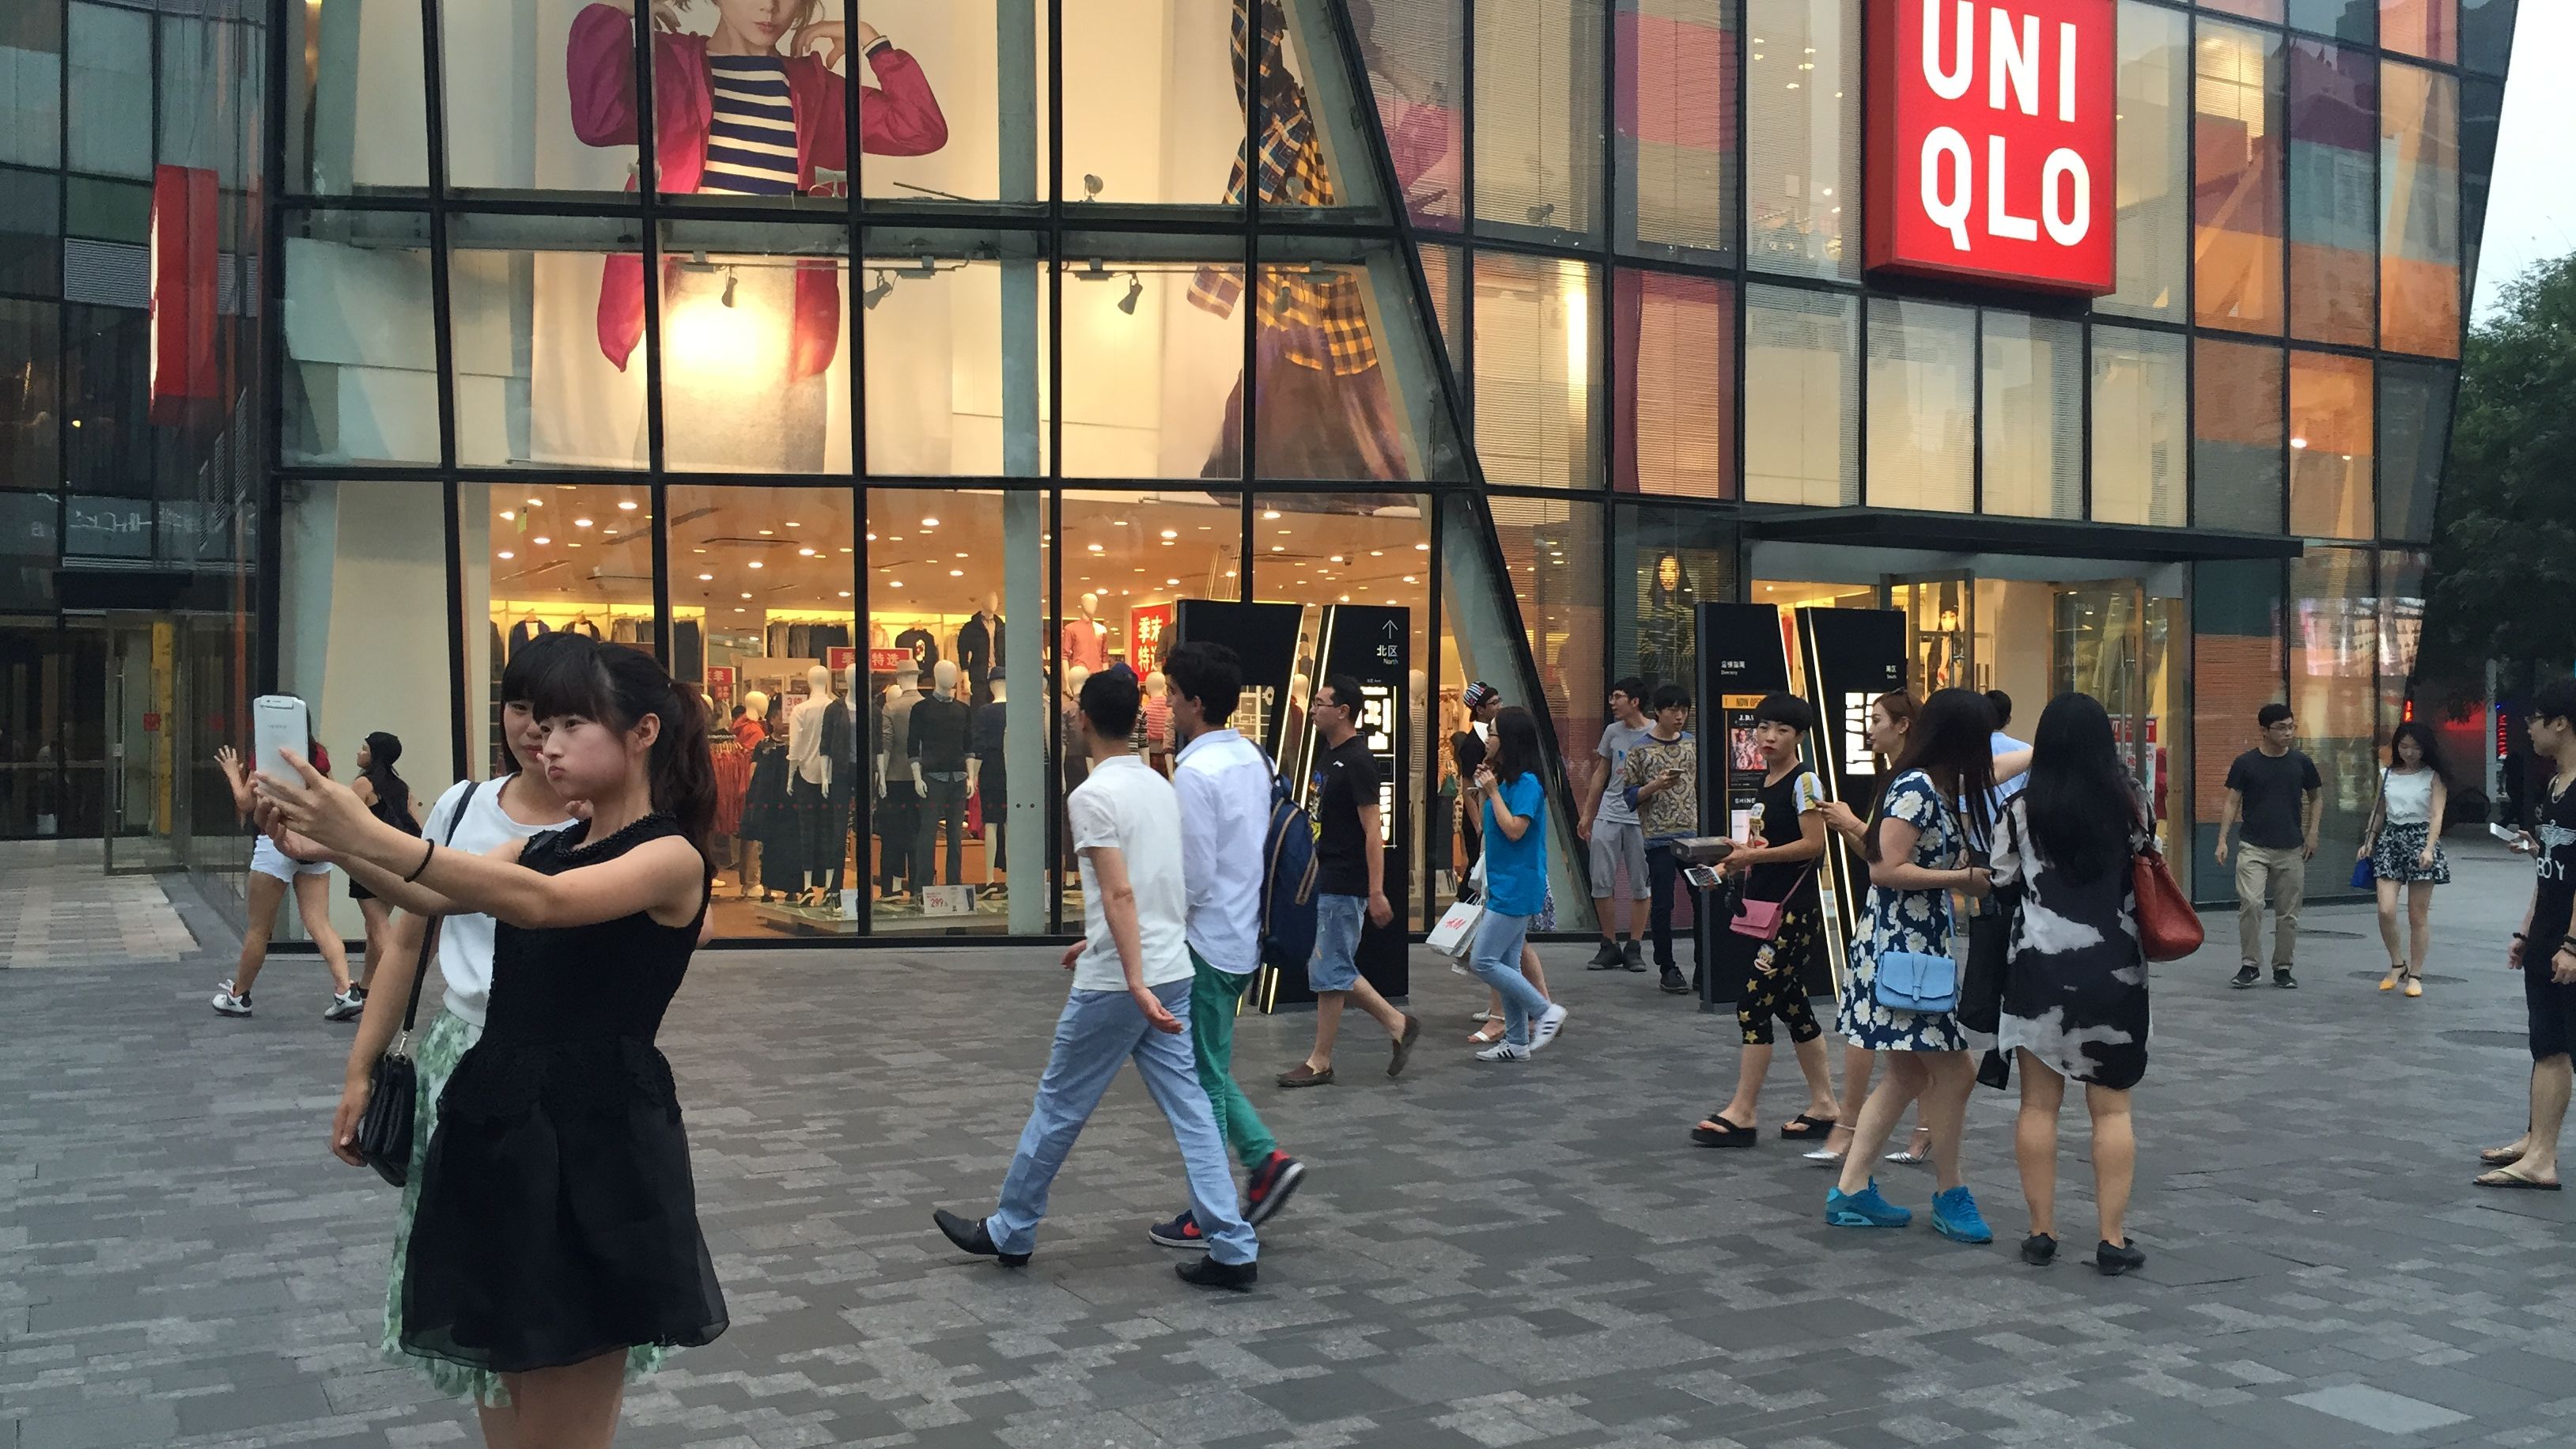 Two women take a selfie outside the Uniqlo store in Beijing on Wednesday, July 15. The store has gained notoriety after a viral sex video was shot inside. 